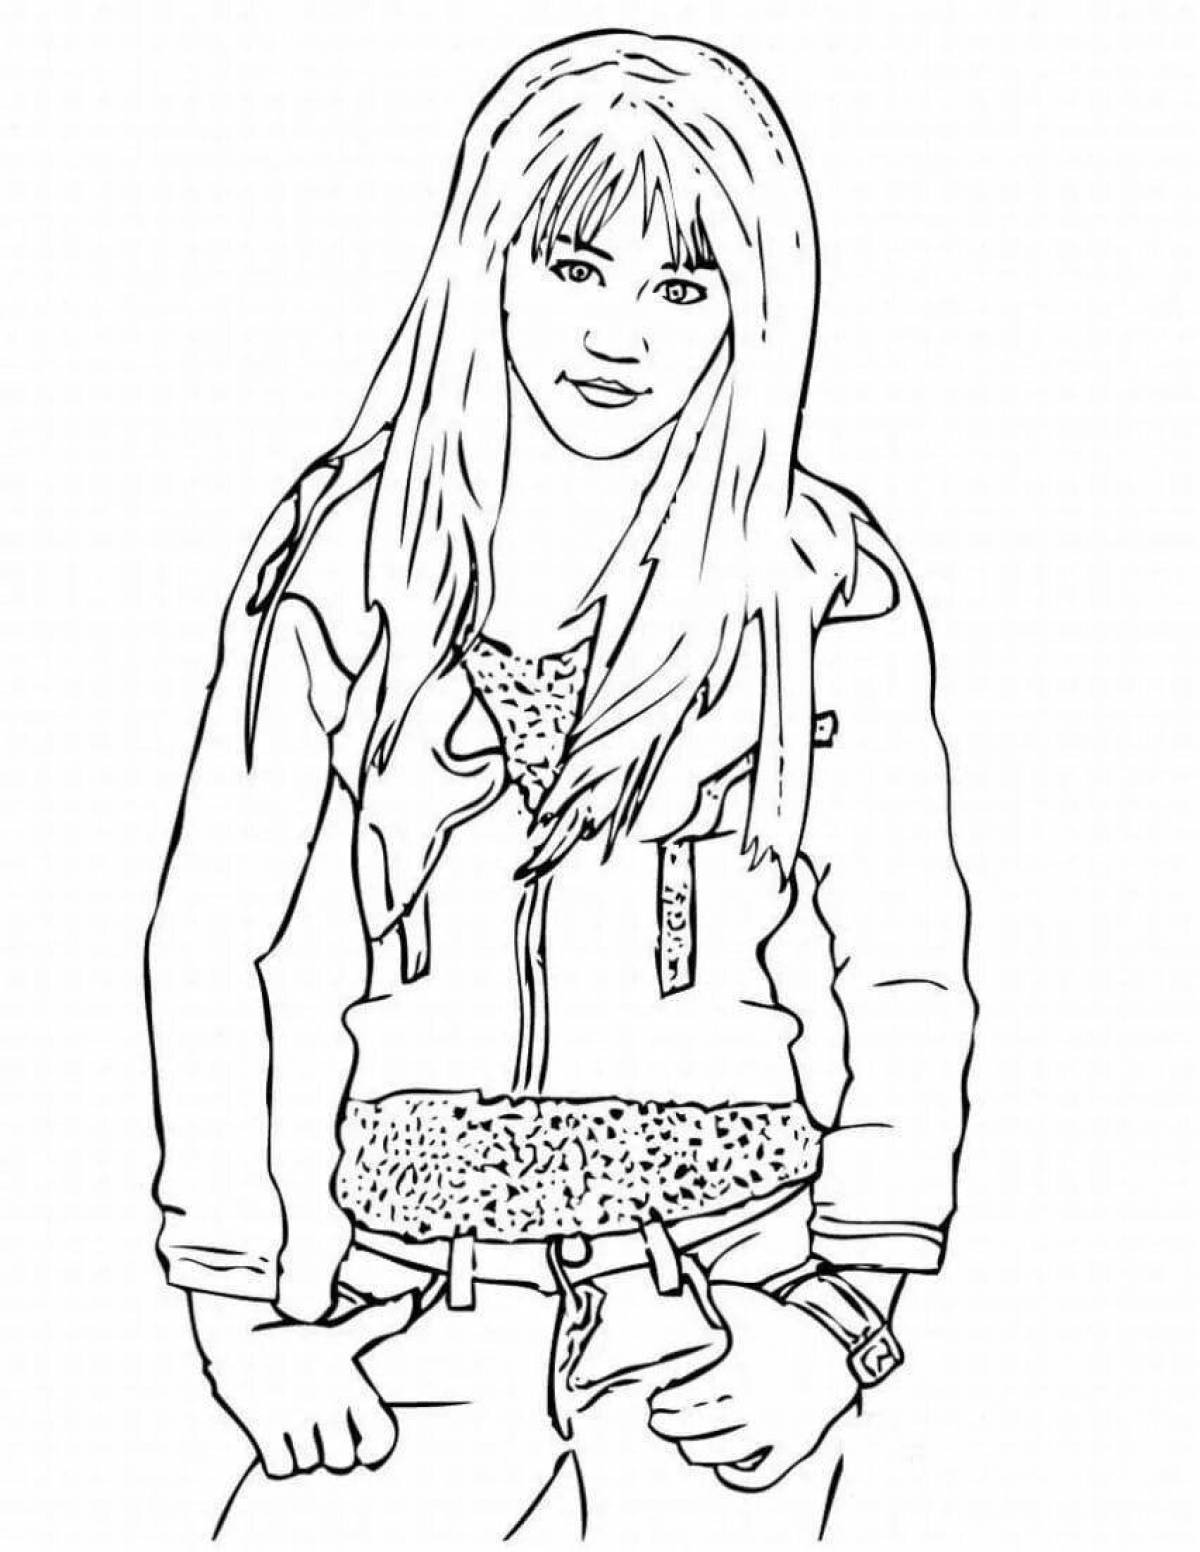 Colorful tomboy coloring page